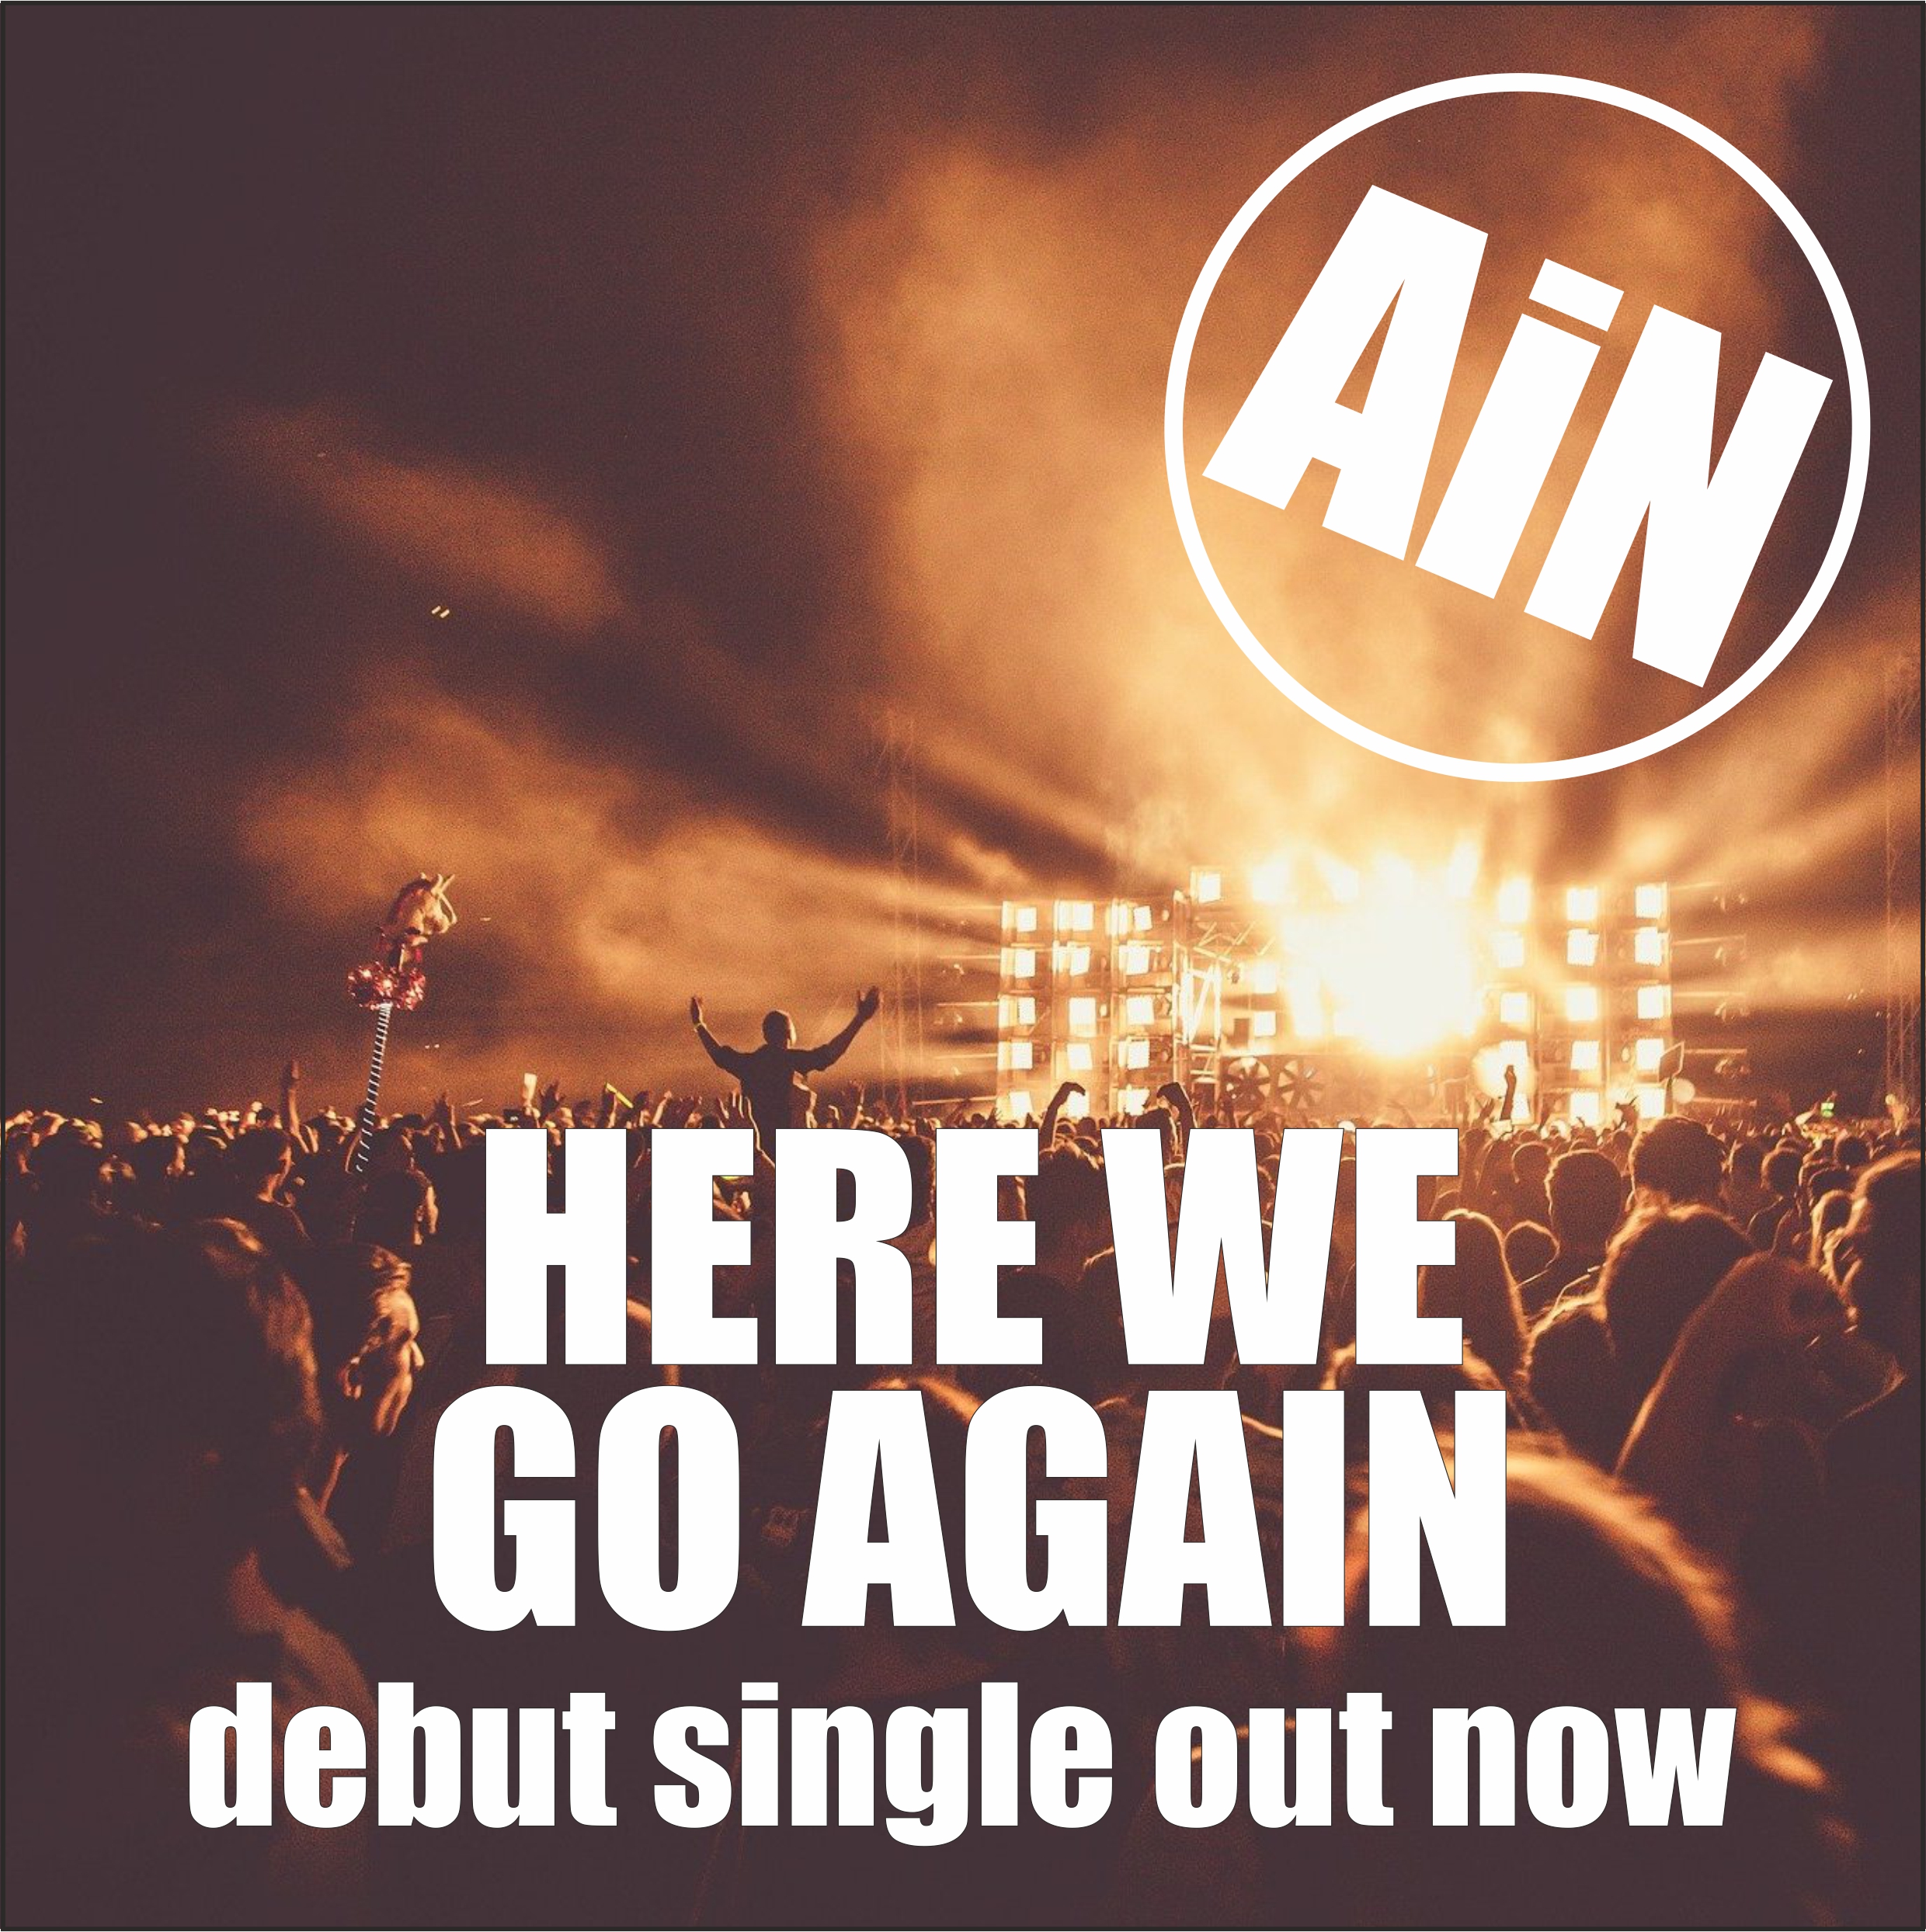 The debut single from Adventures in Noise is called Here We Go Again